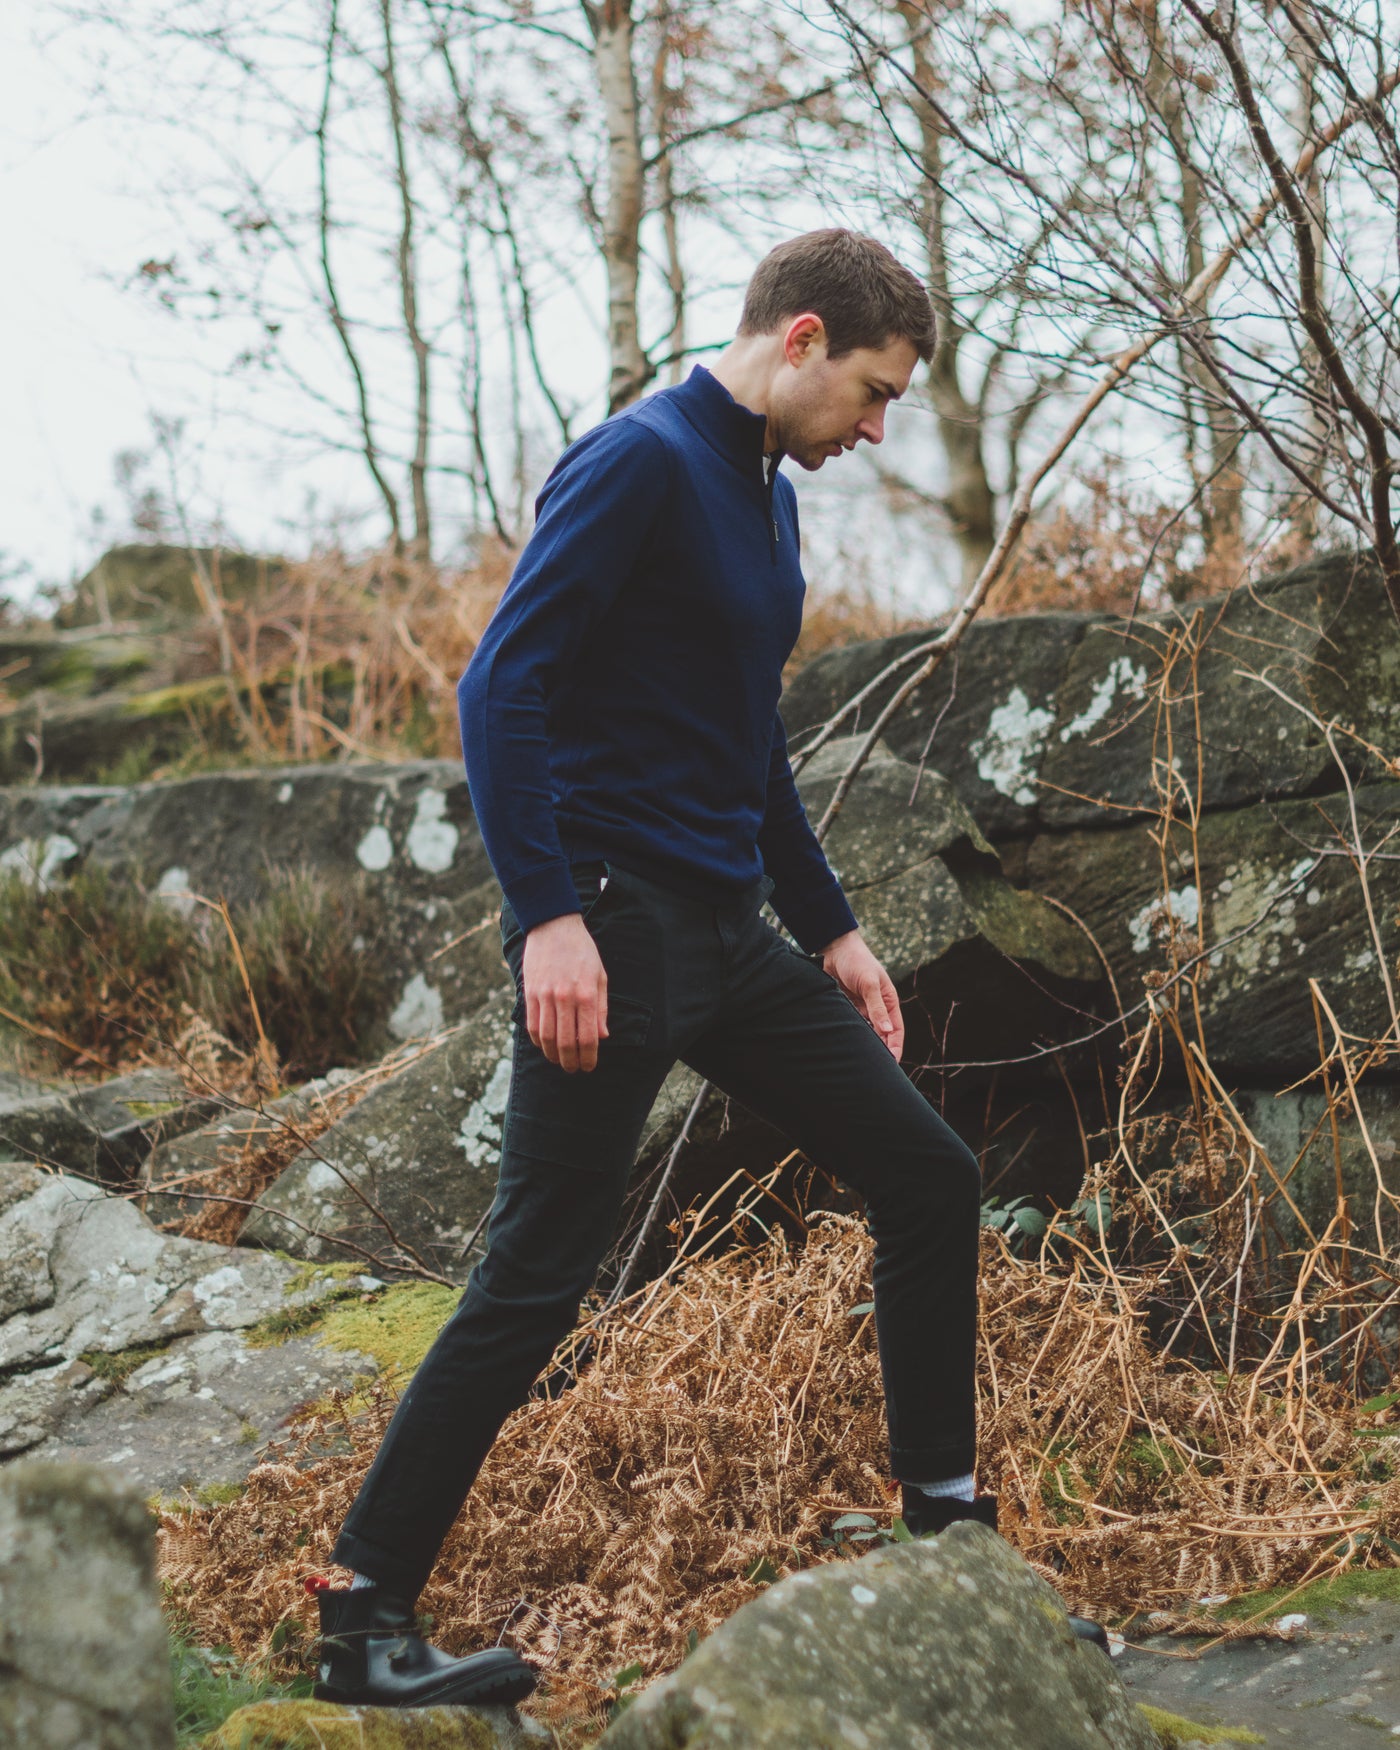 Model walking in the woods wearing our unisex extra-fine merino wool 1/4 zip jumper in navy, made from a lightweight fabric and reactive natural fibre. Ideal for layering under our waterproof dry robes for spectating touchdown sports or walking the dog. The perfect addition to any minimalist capsule wardrobe.